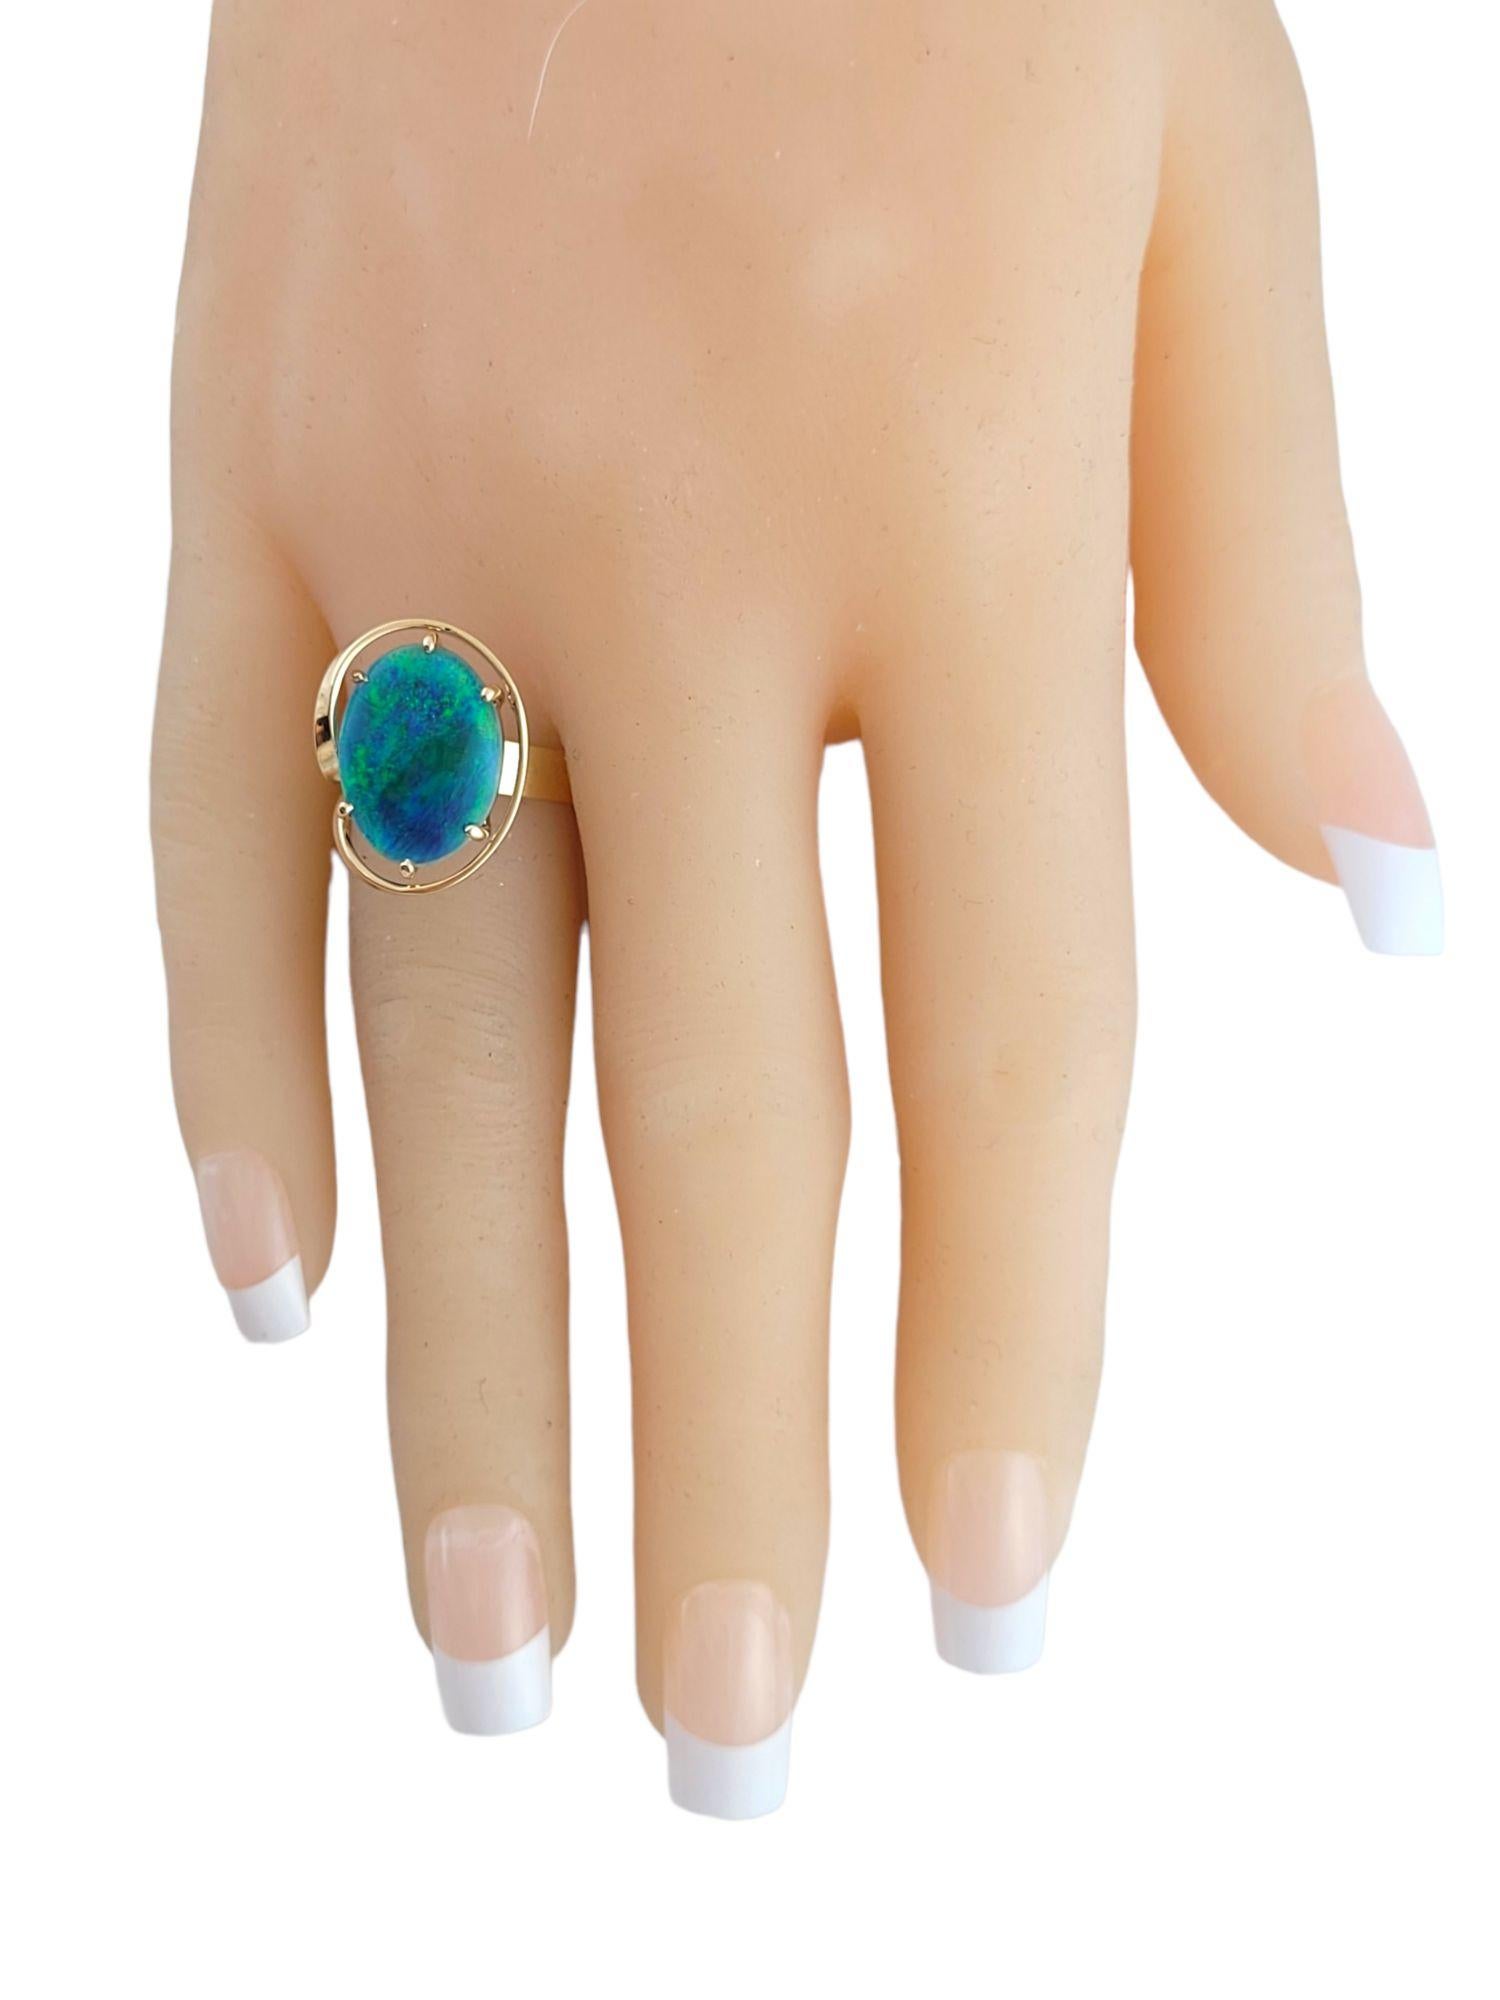 9K Yellow Gold Black Opal Ring Size 6.25-6.5 #14772 For Sale 2